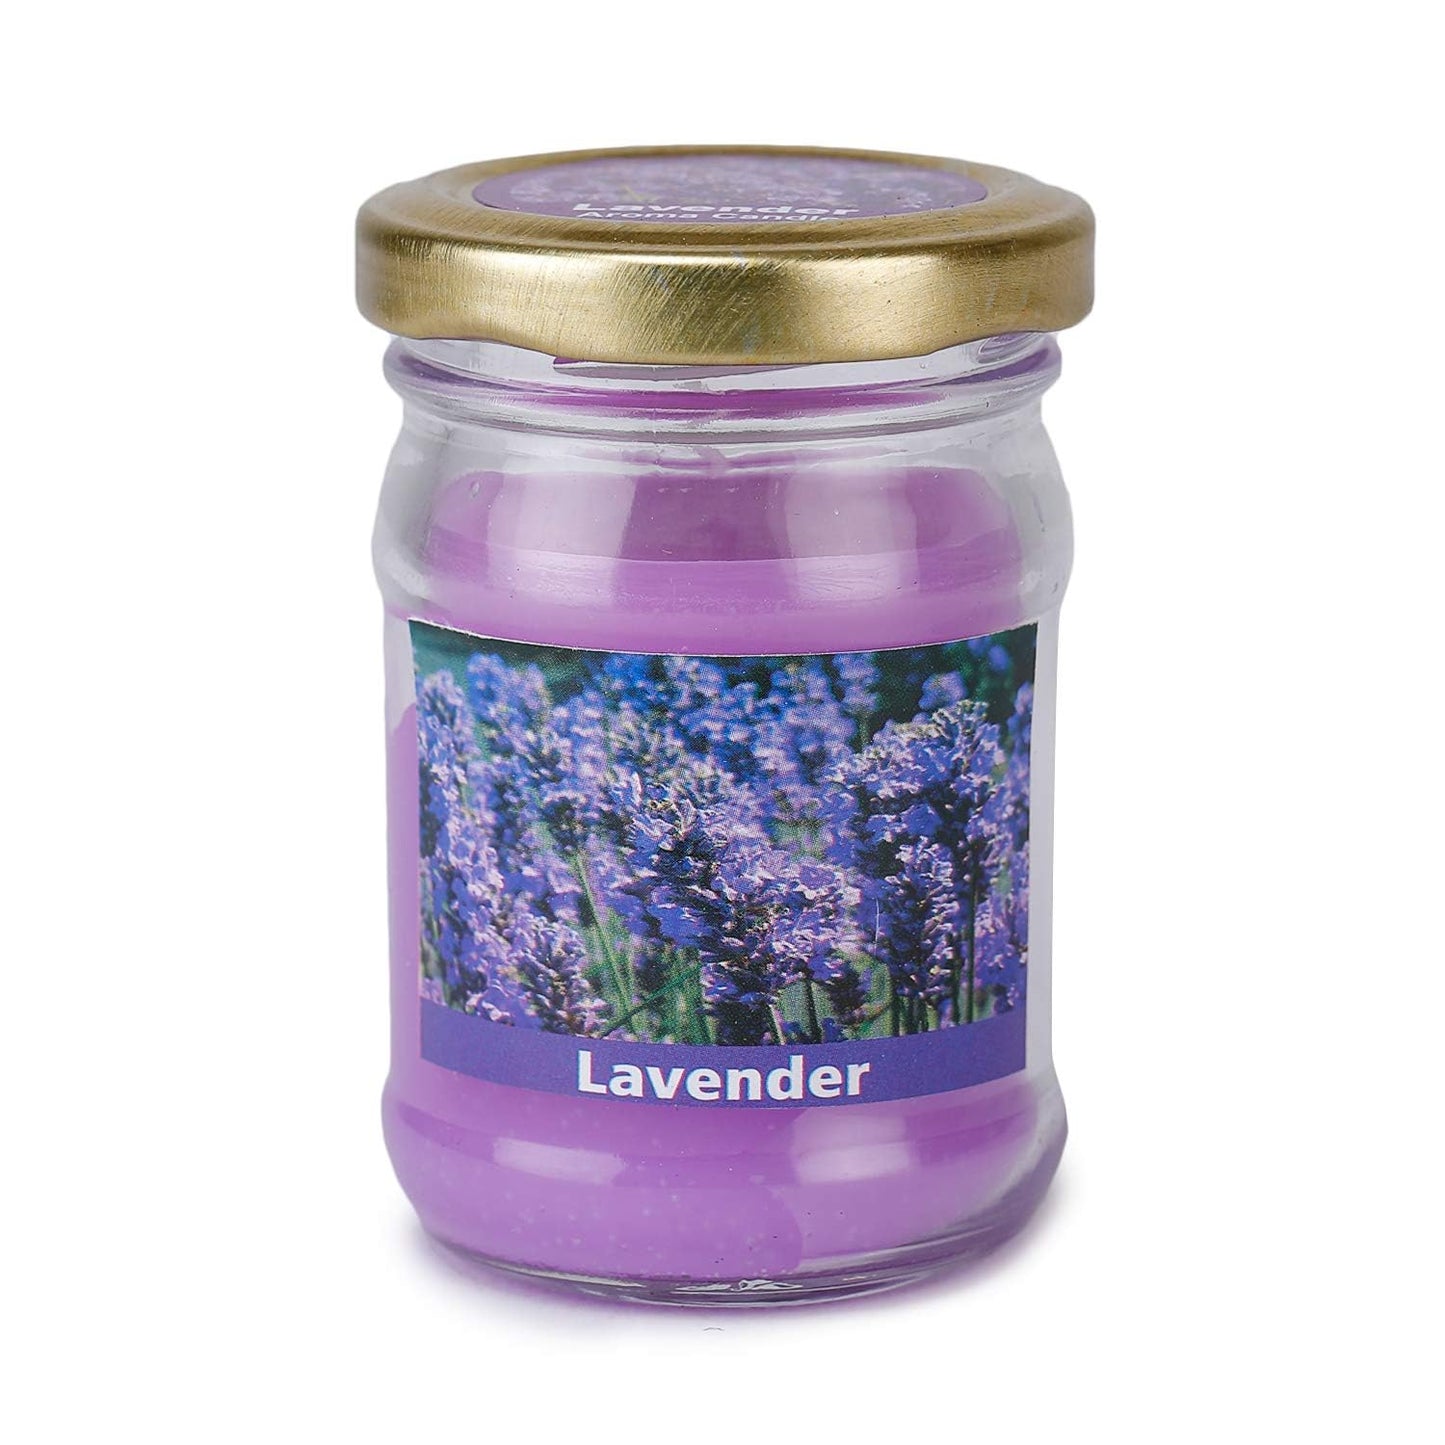 Pujahome Lavender Flavour Aroma Candle, Glass Jar, 1 Pc